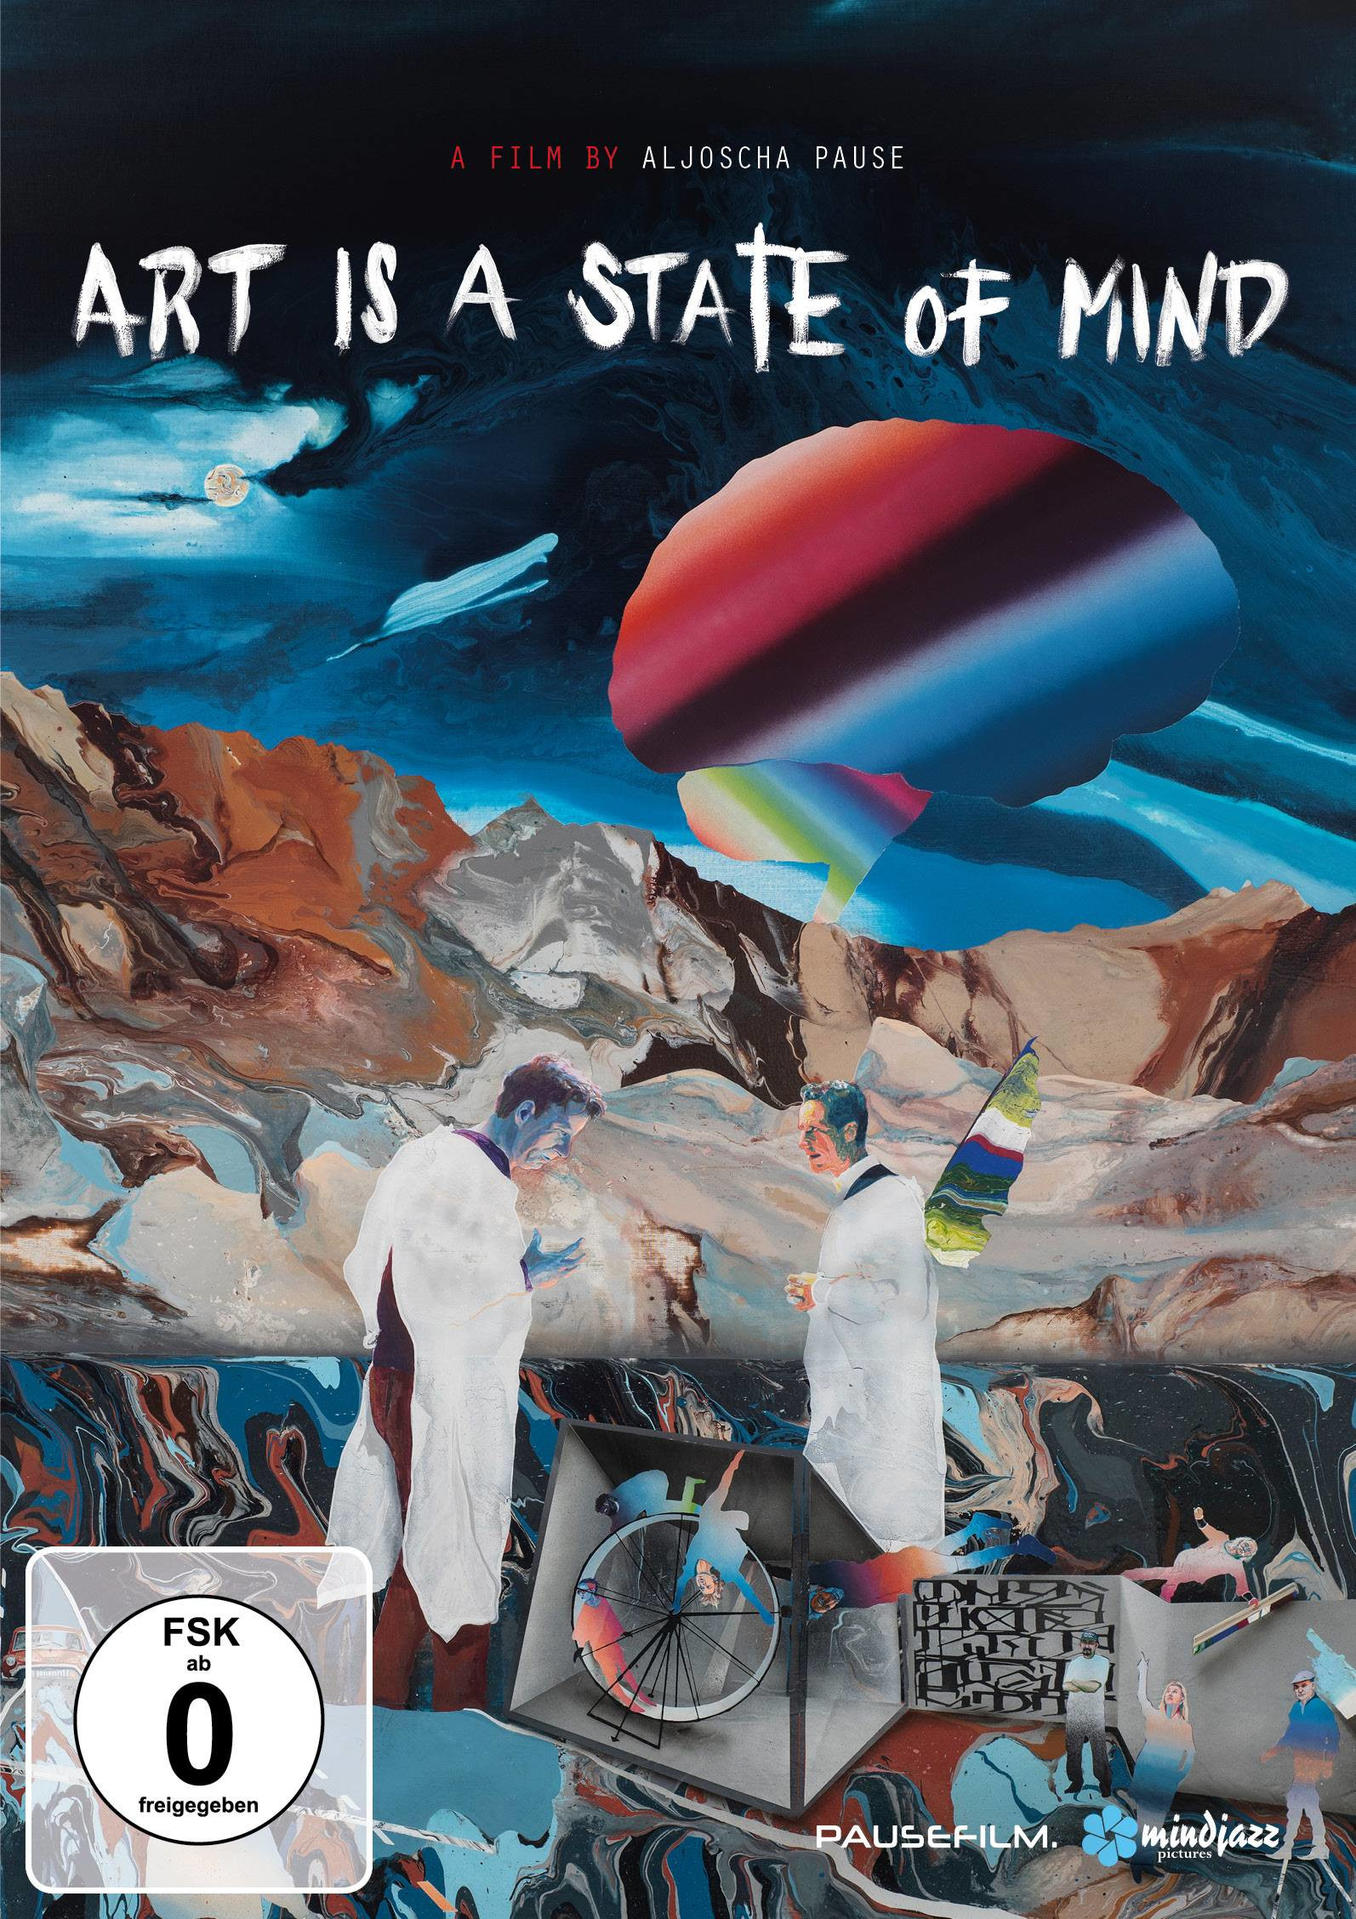 State of Mind a is Art Blu-ray